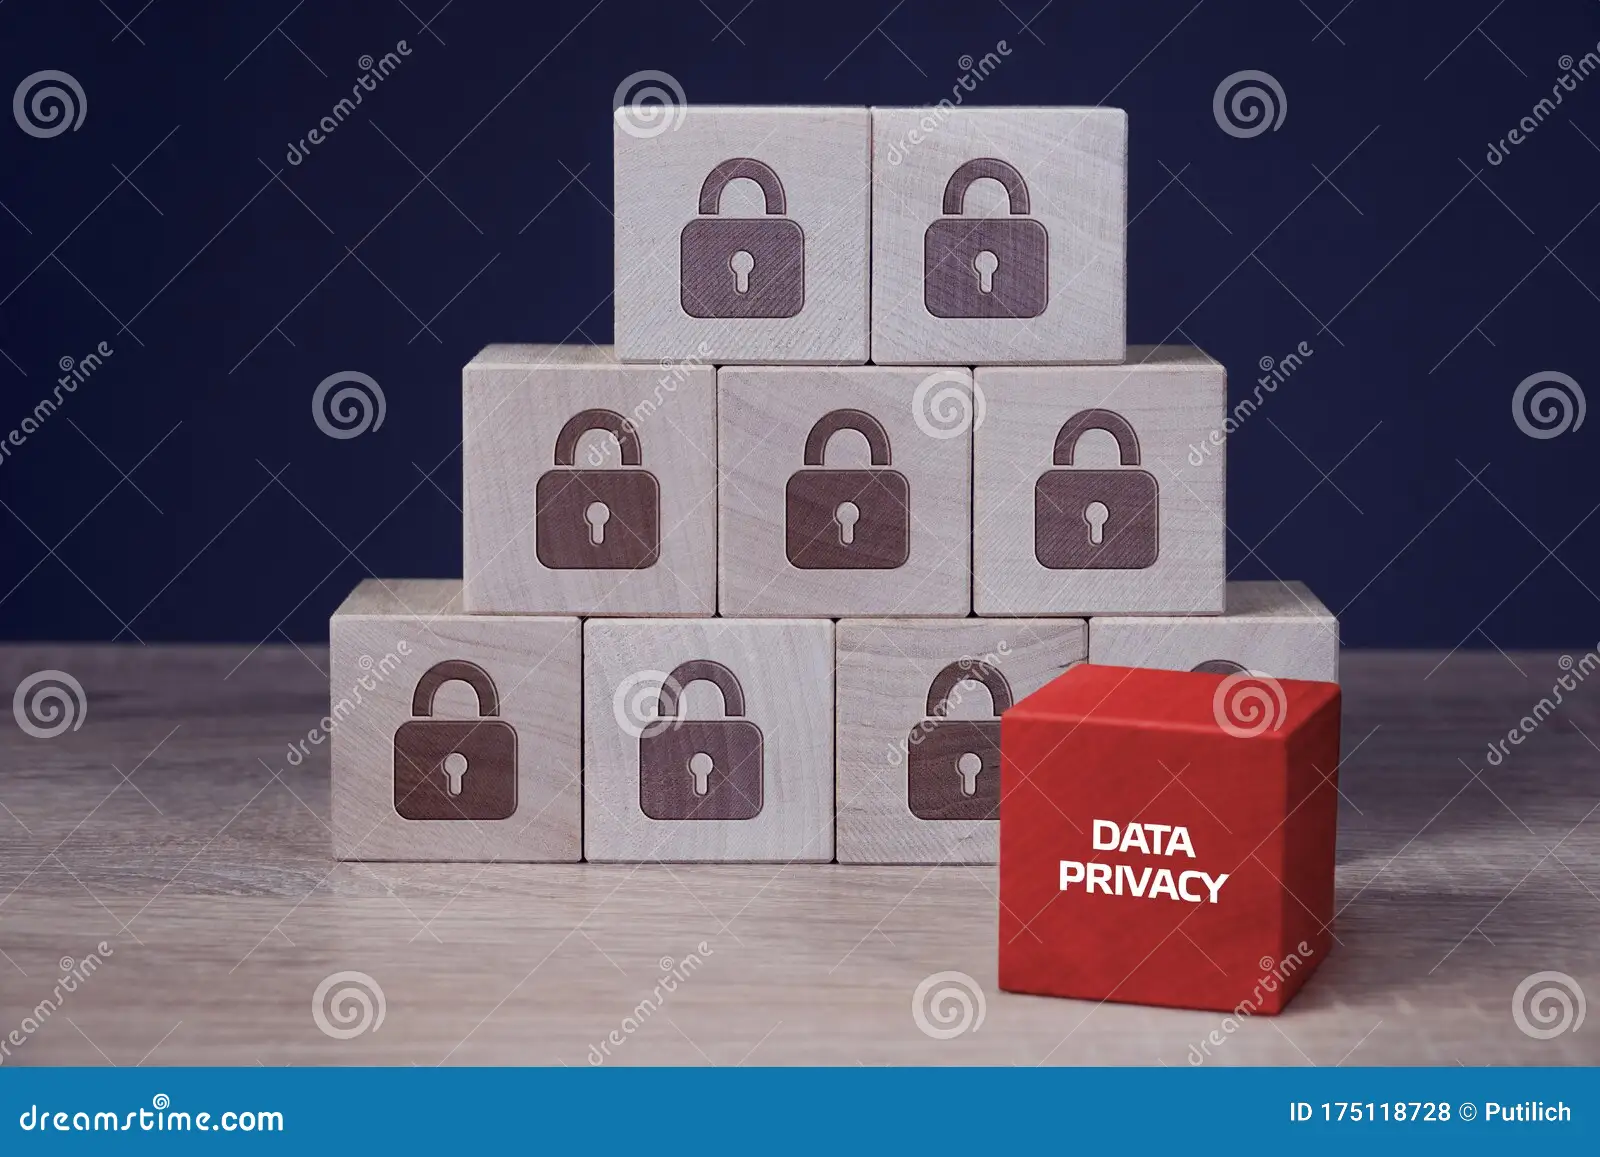 Personal Data Ownership as a Legal Right?